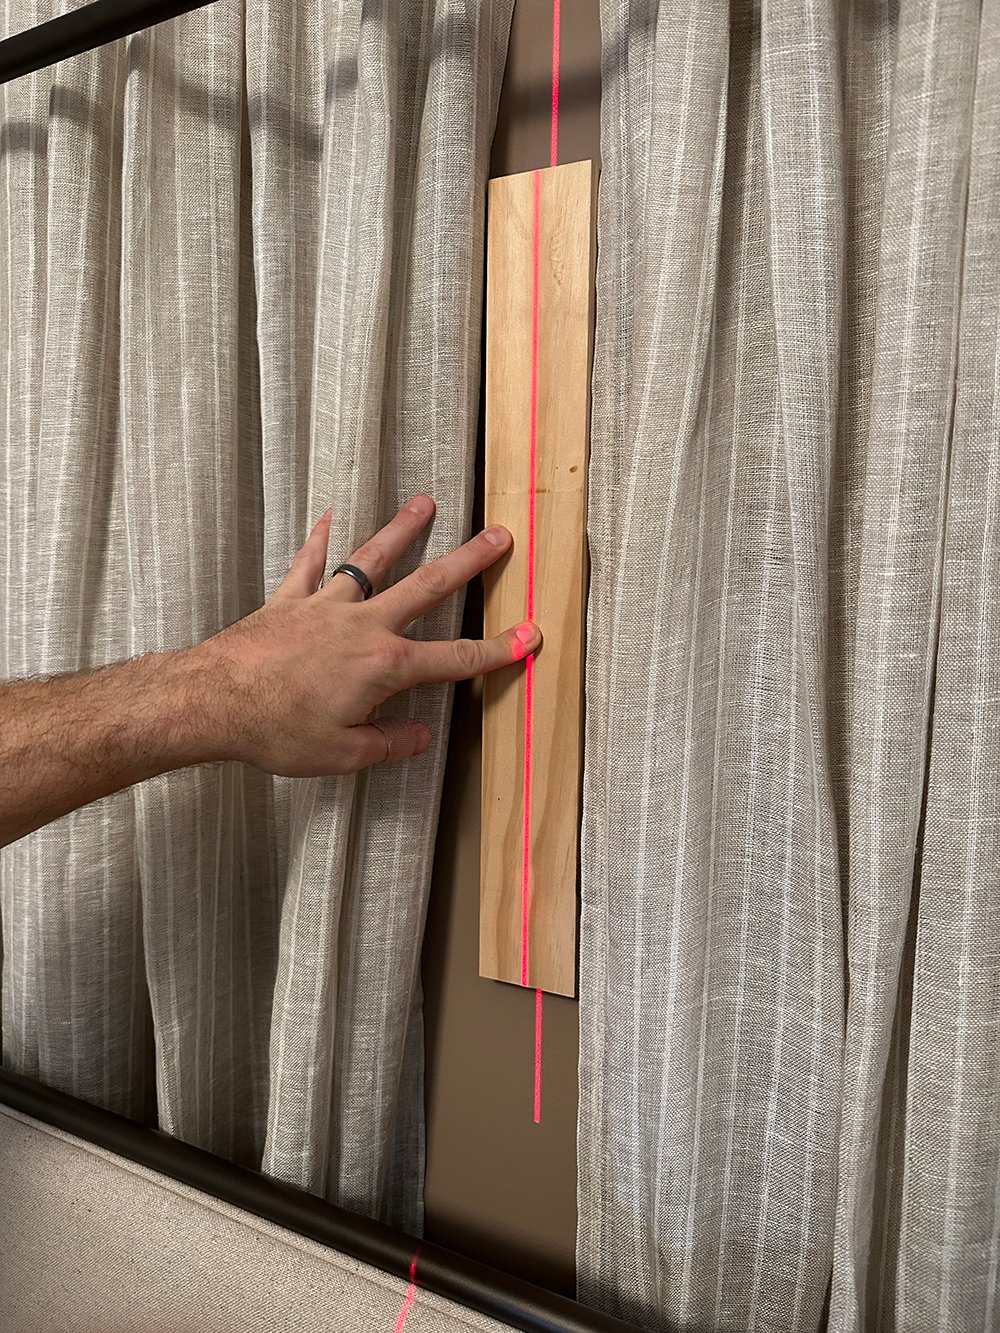 How to Hang Artwork in Front of Curtains - roomfortuesday.com